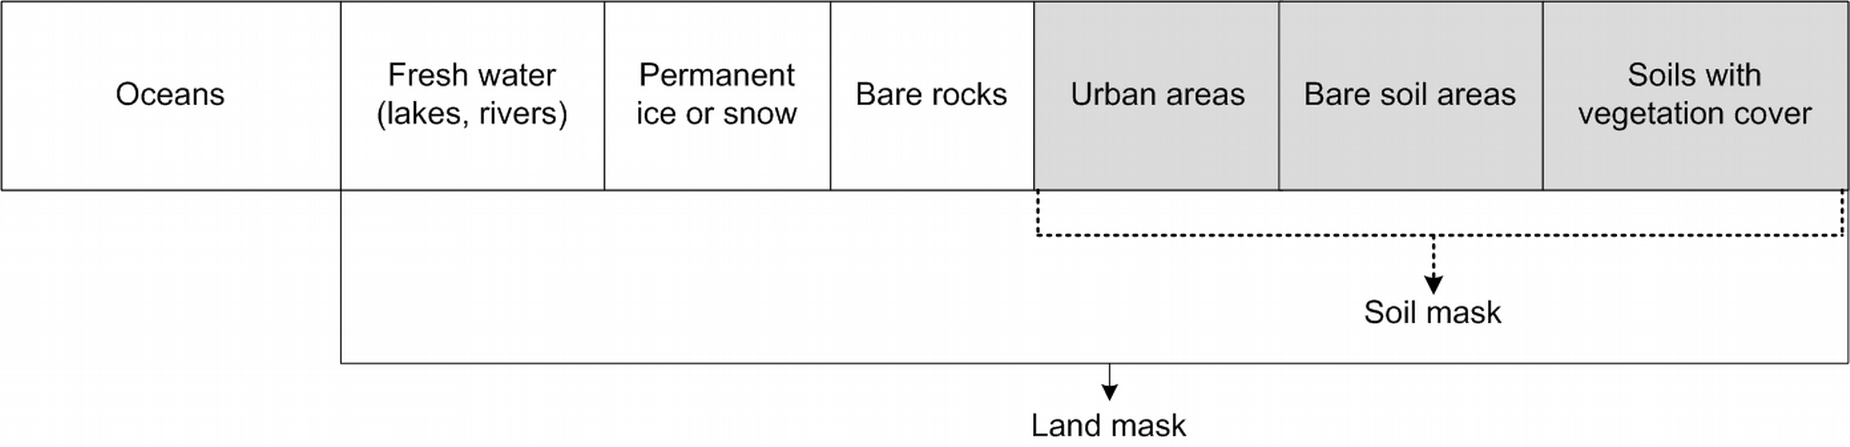 Example of a soil (land) mask scheme.